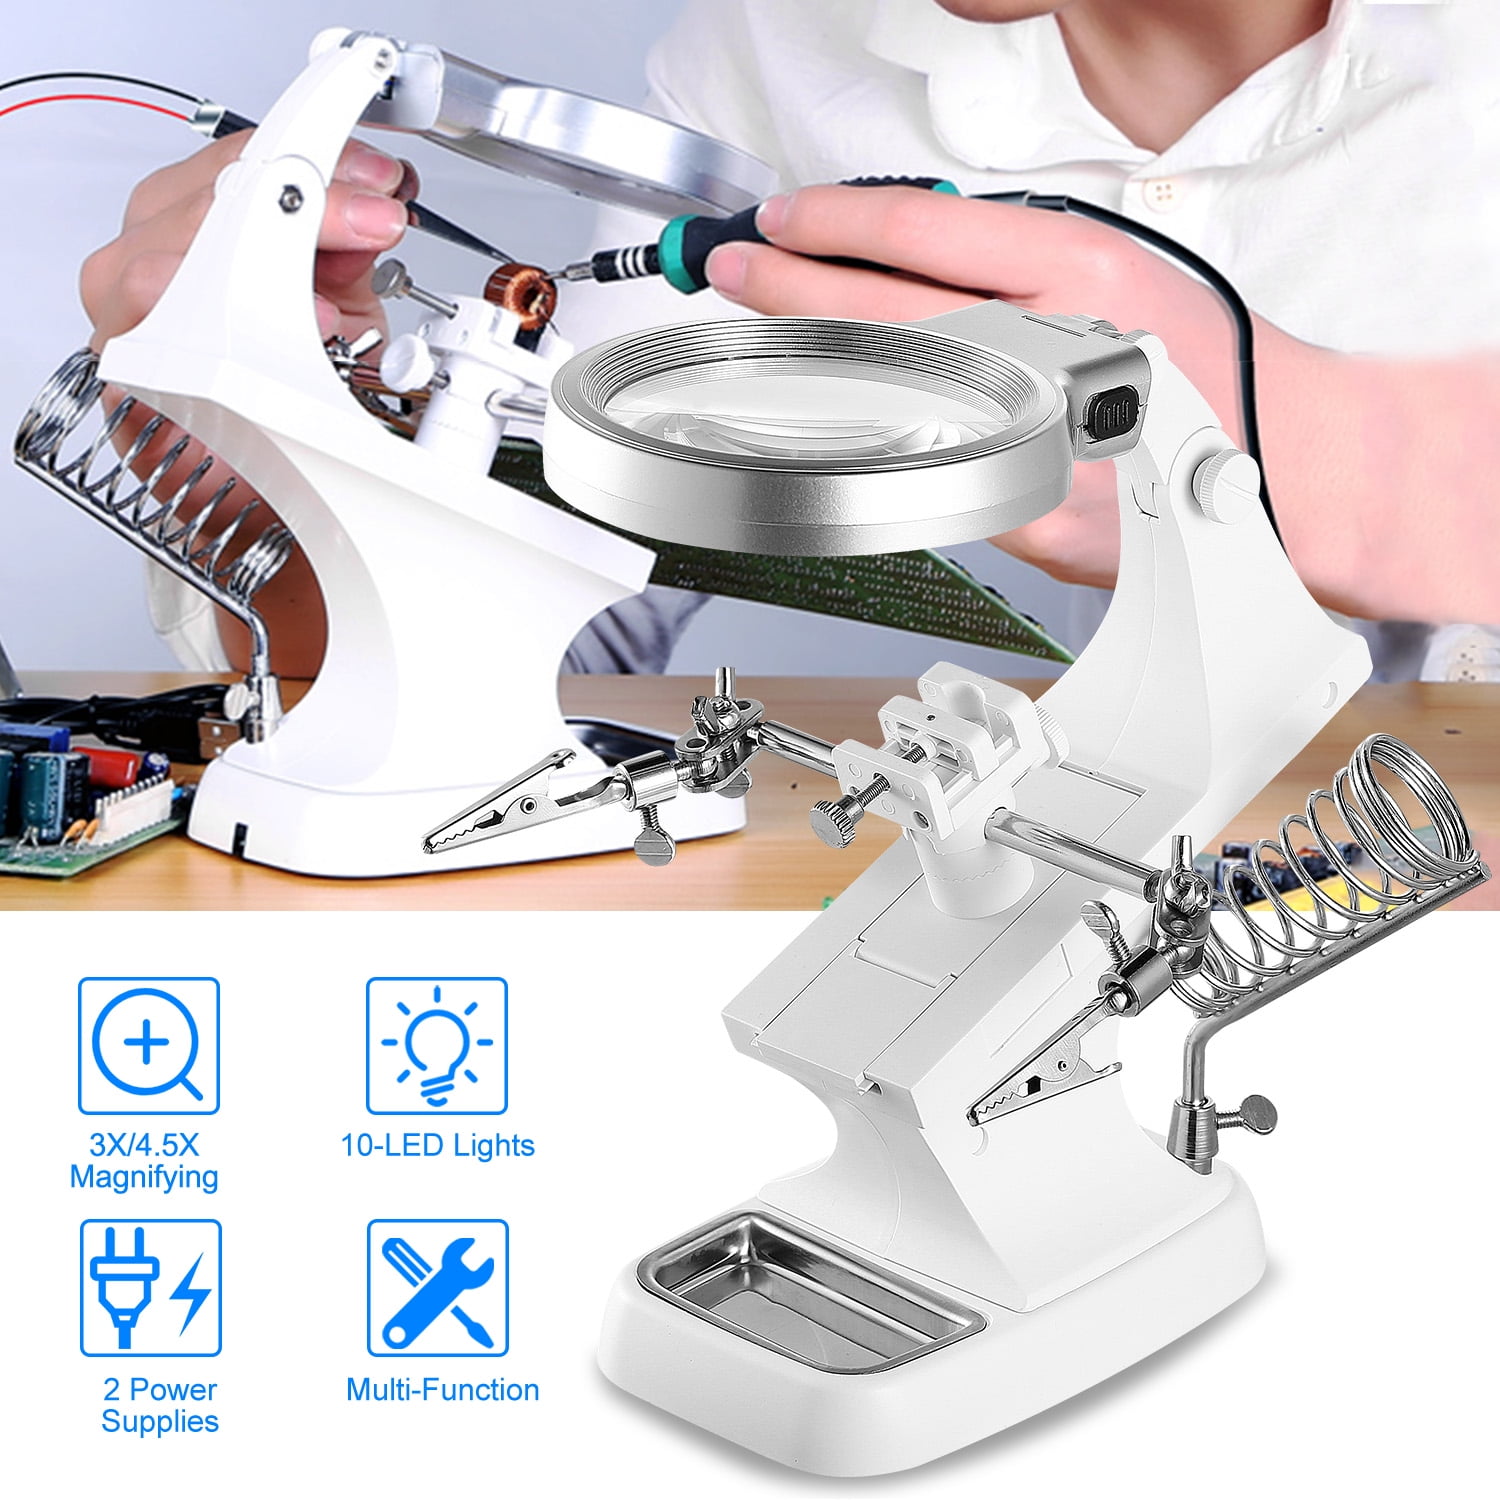 Electriduct Helping Hands Magnifying Glass, LED & Soldering Station